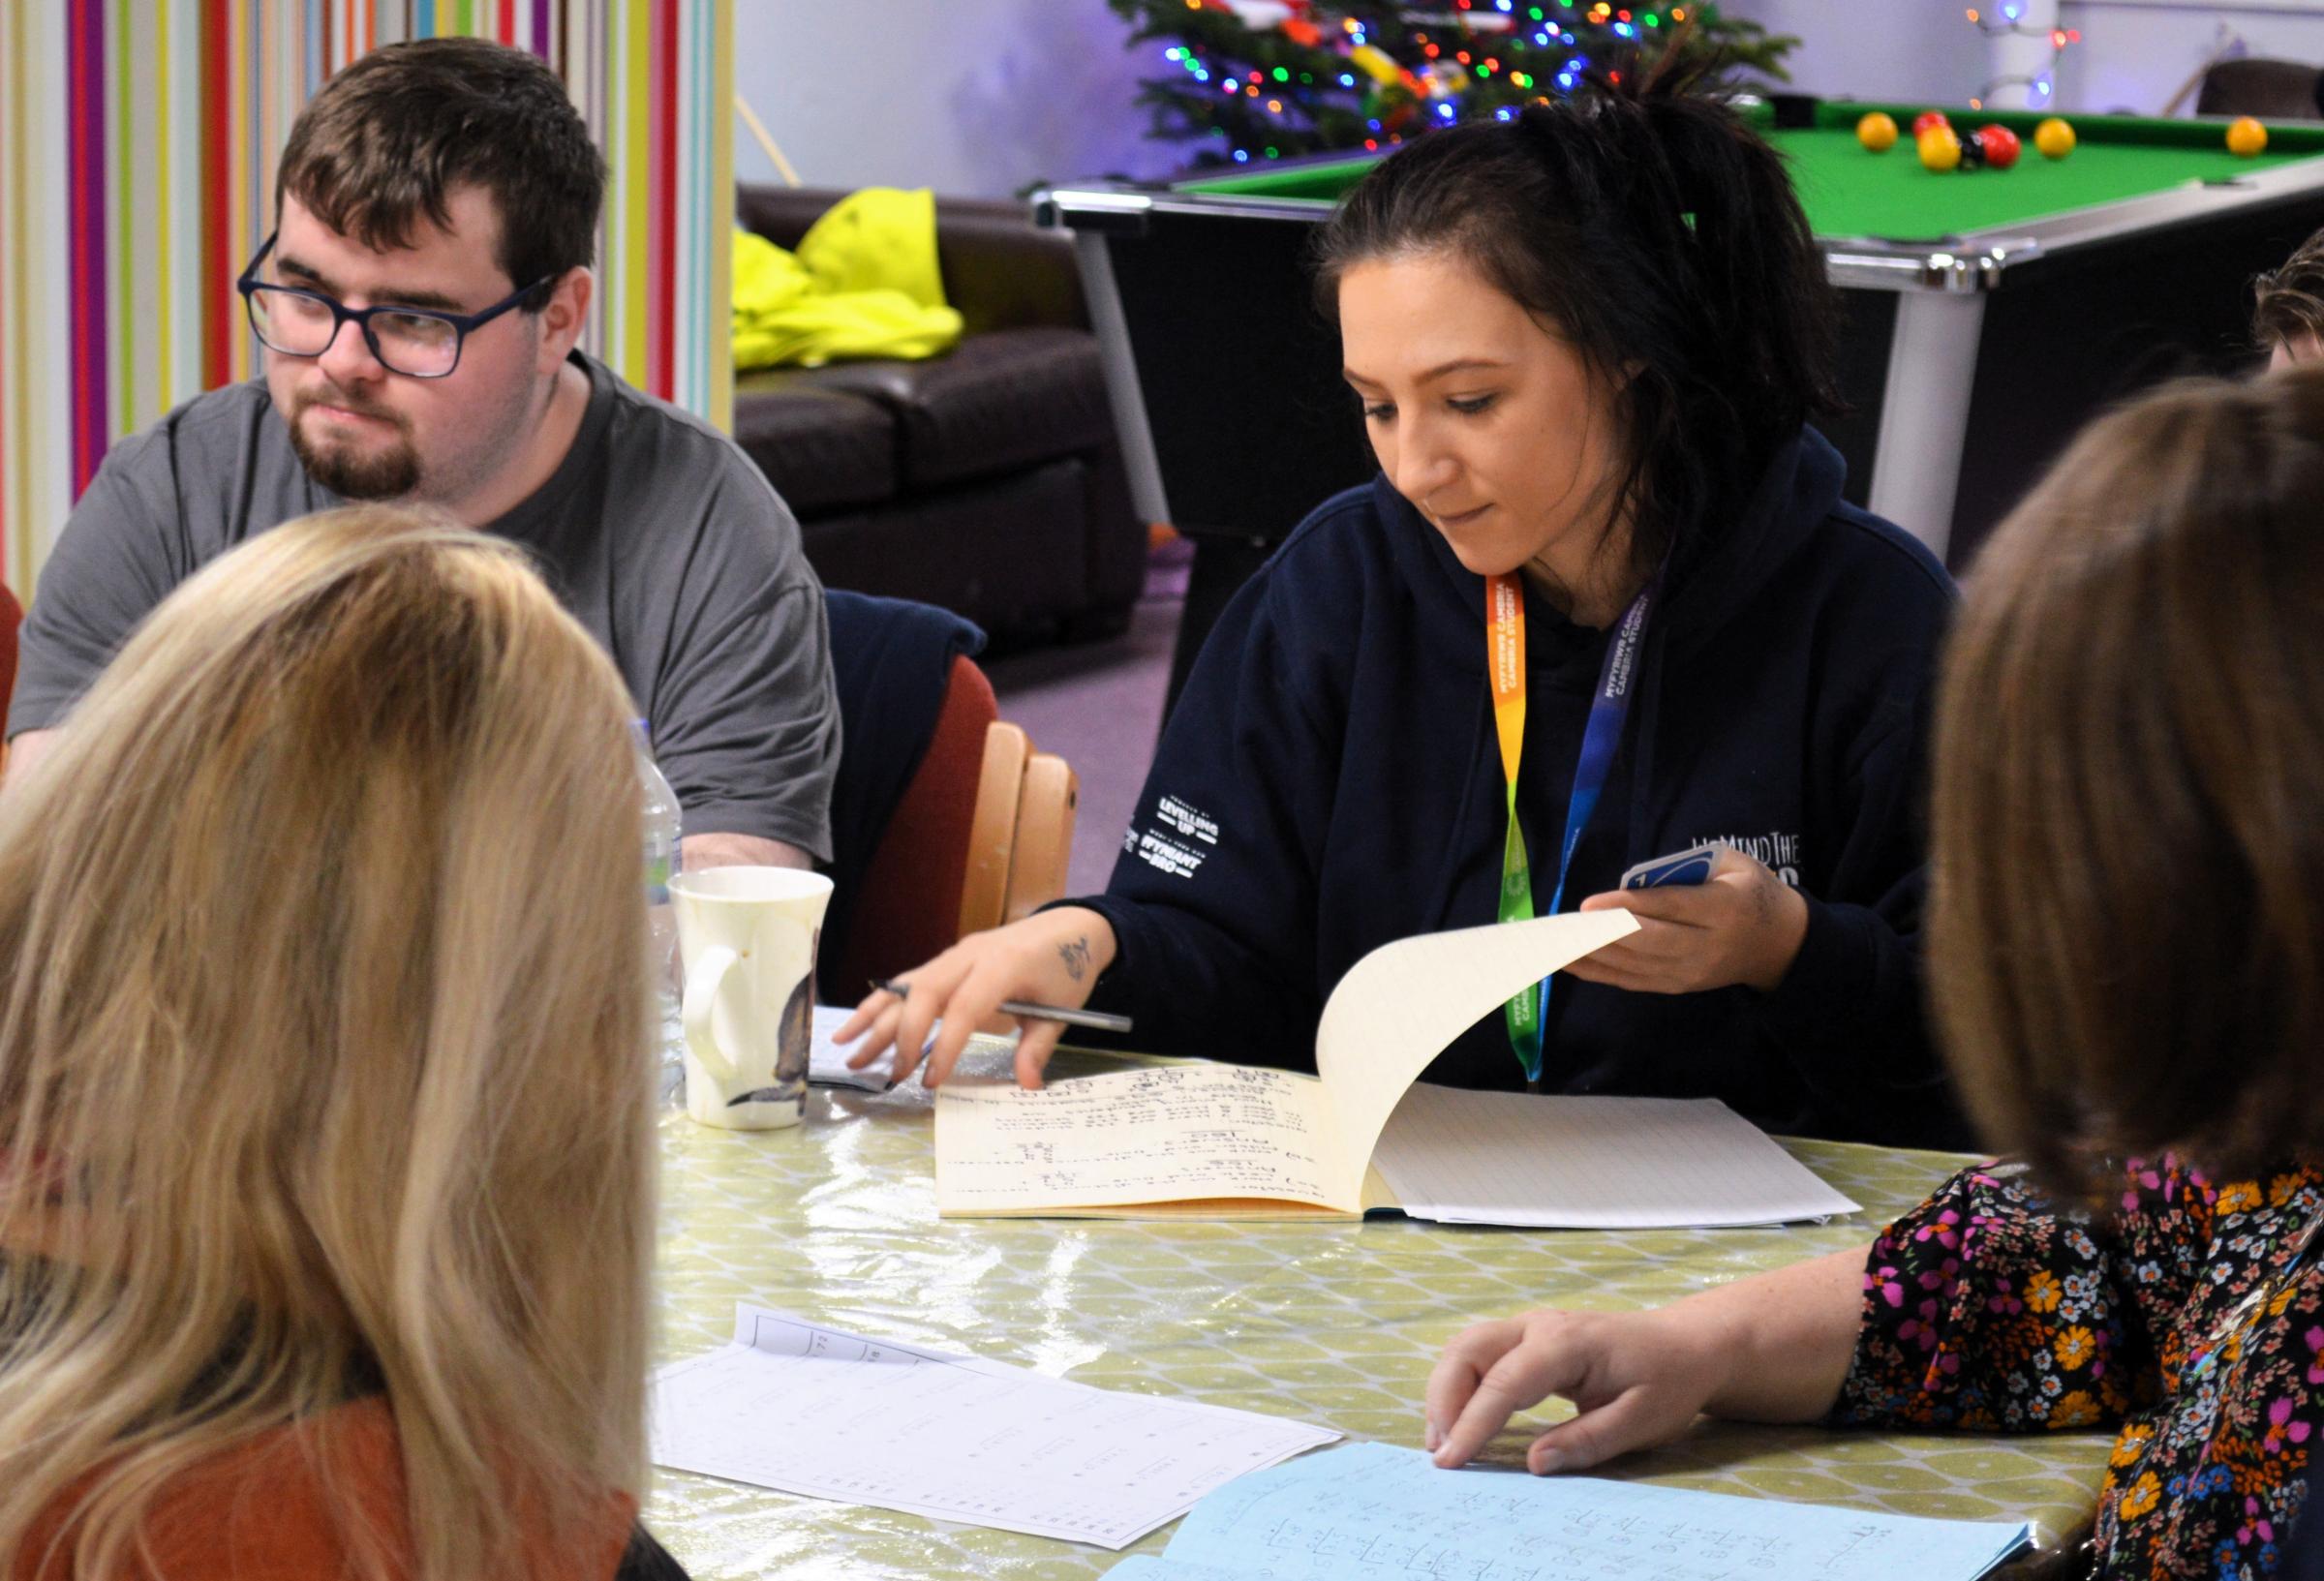 WeMindTheGaps employability and confidence-building sessions take place at the Jade Jones Pavilion in Flint and Coleg Cambrias Yale site in Wrexham.